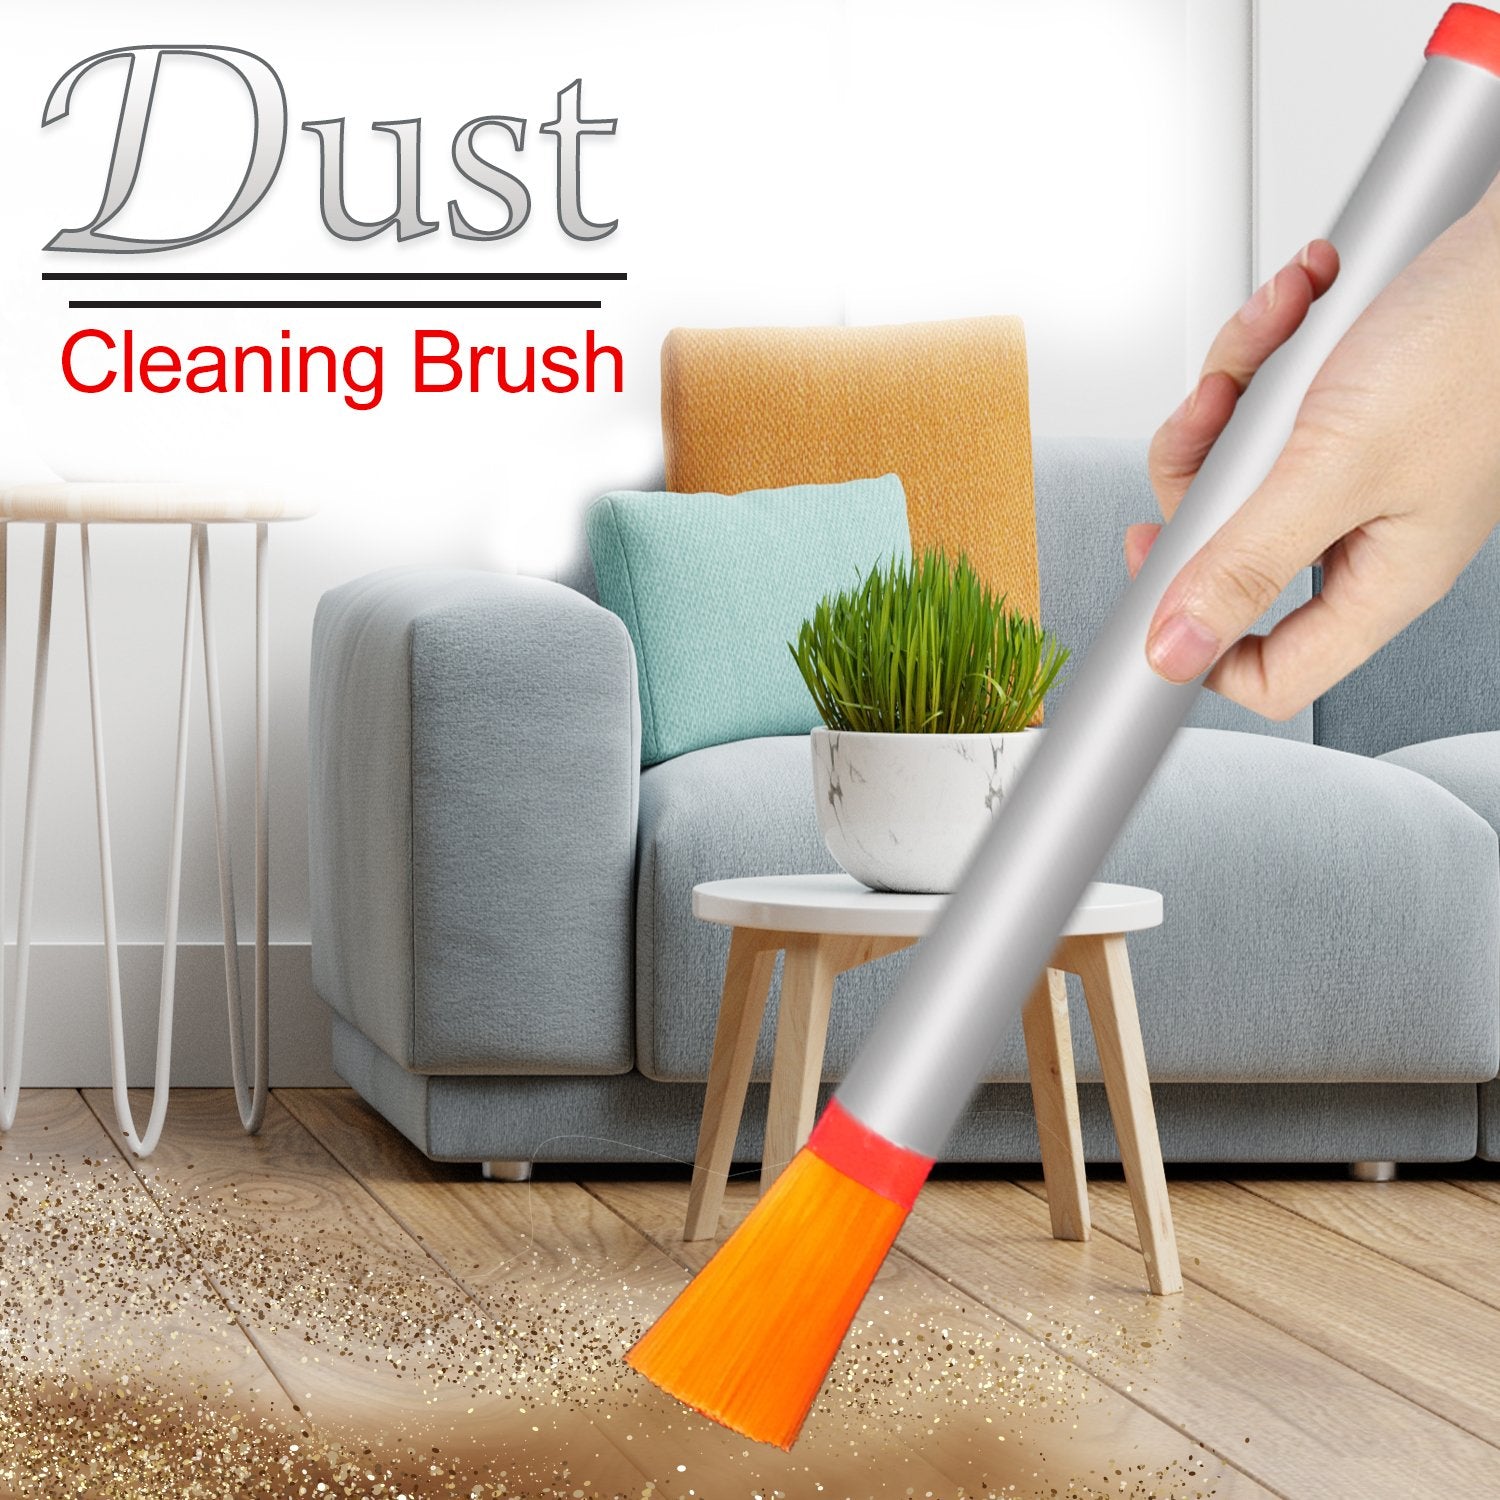 2487 Dust Cleaning Brush for Deep Cleansteel bodyperfect size - SkyShopy